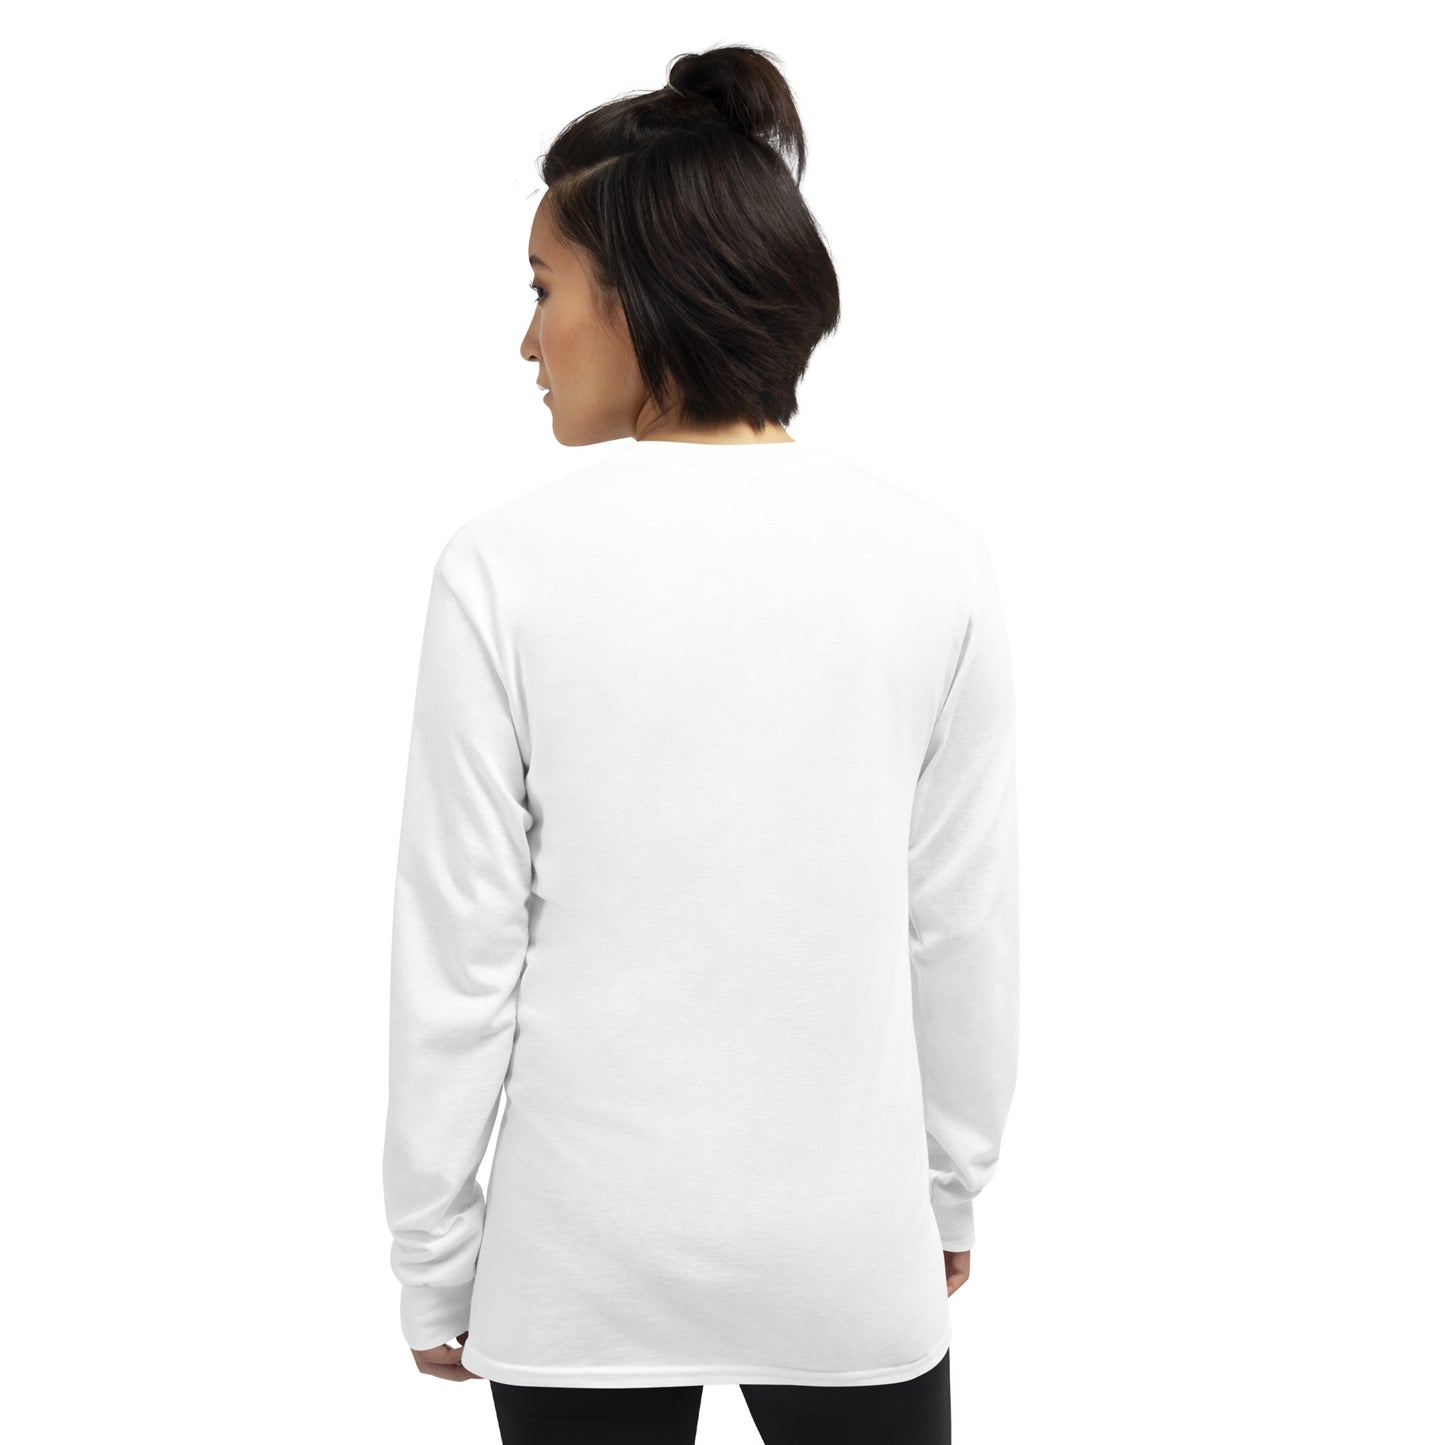 Boxed Smile Tee in White - Long Sleeve